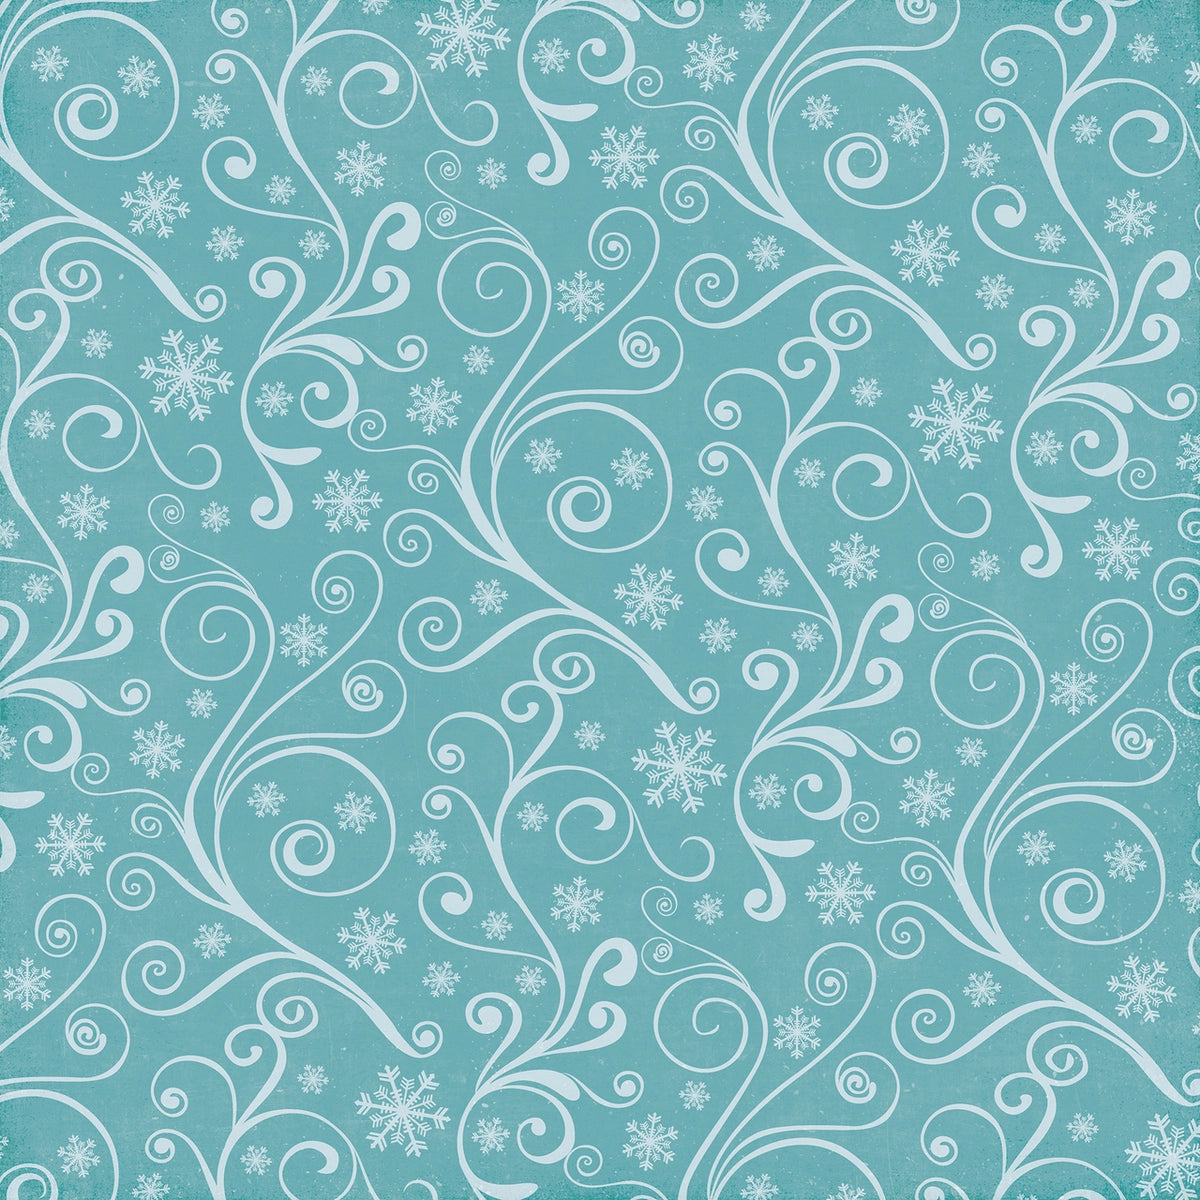  Side B - snowflakes and swirls pattern on turquoise background